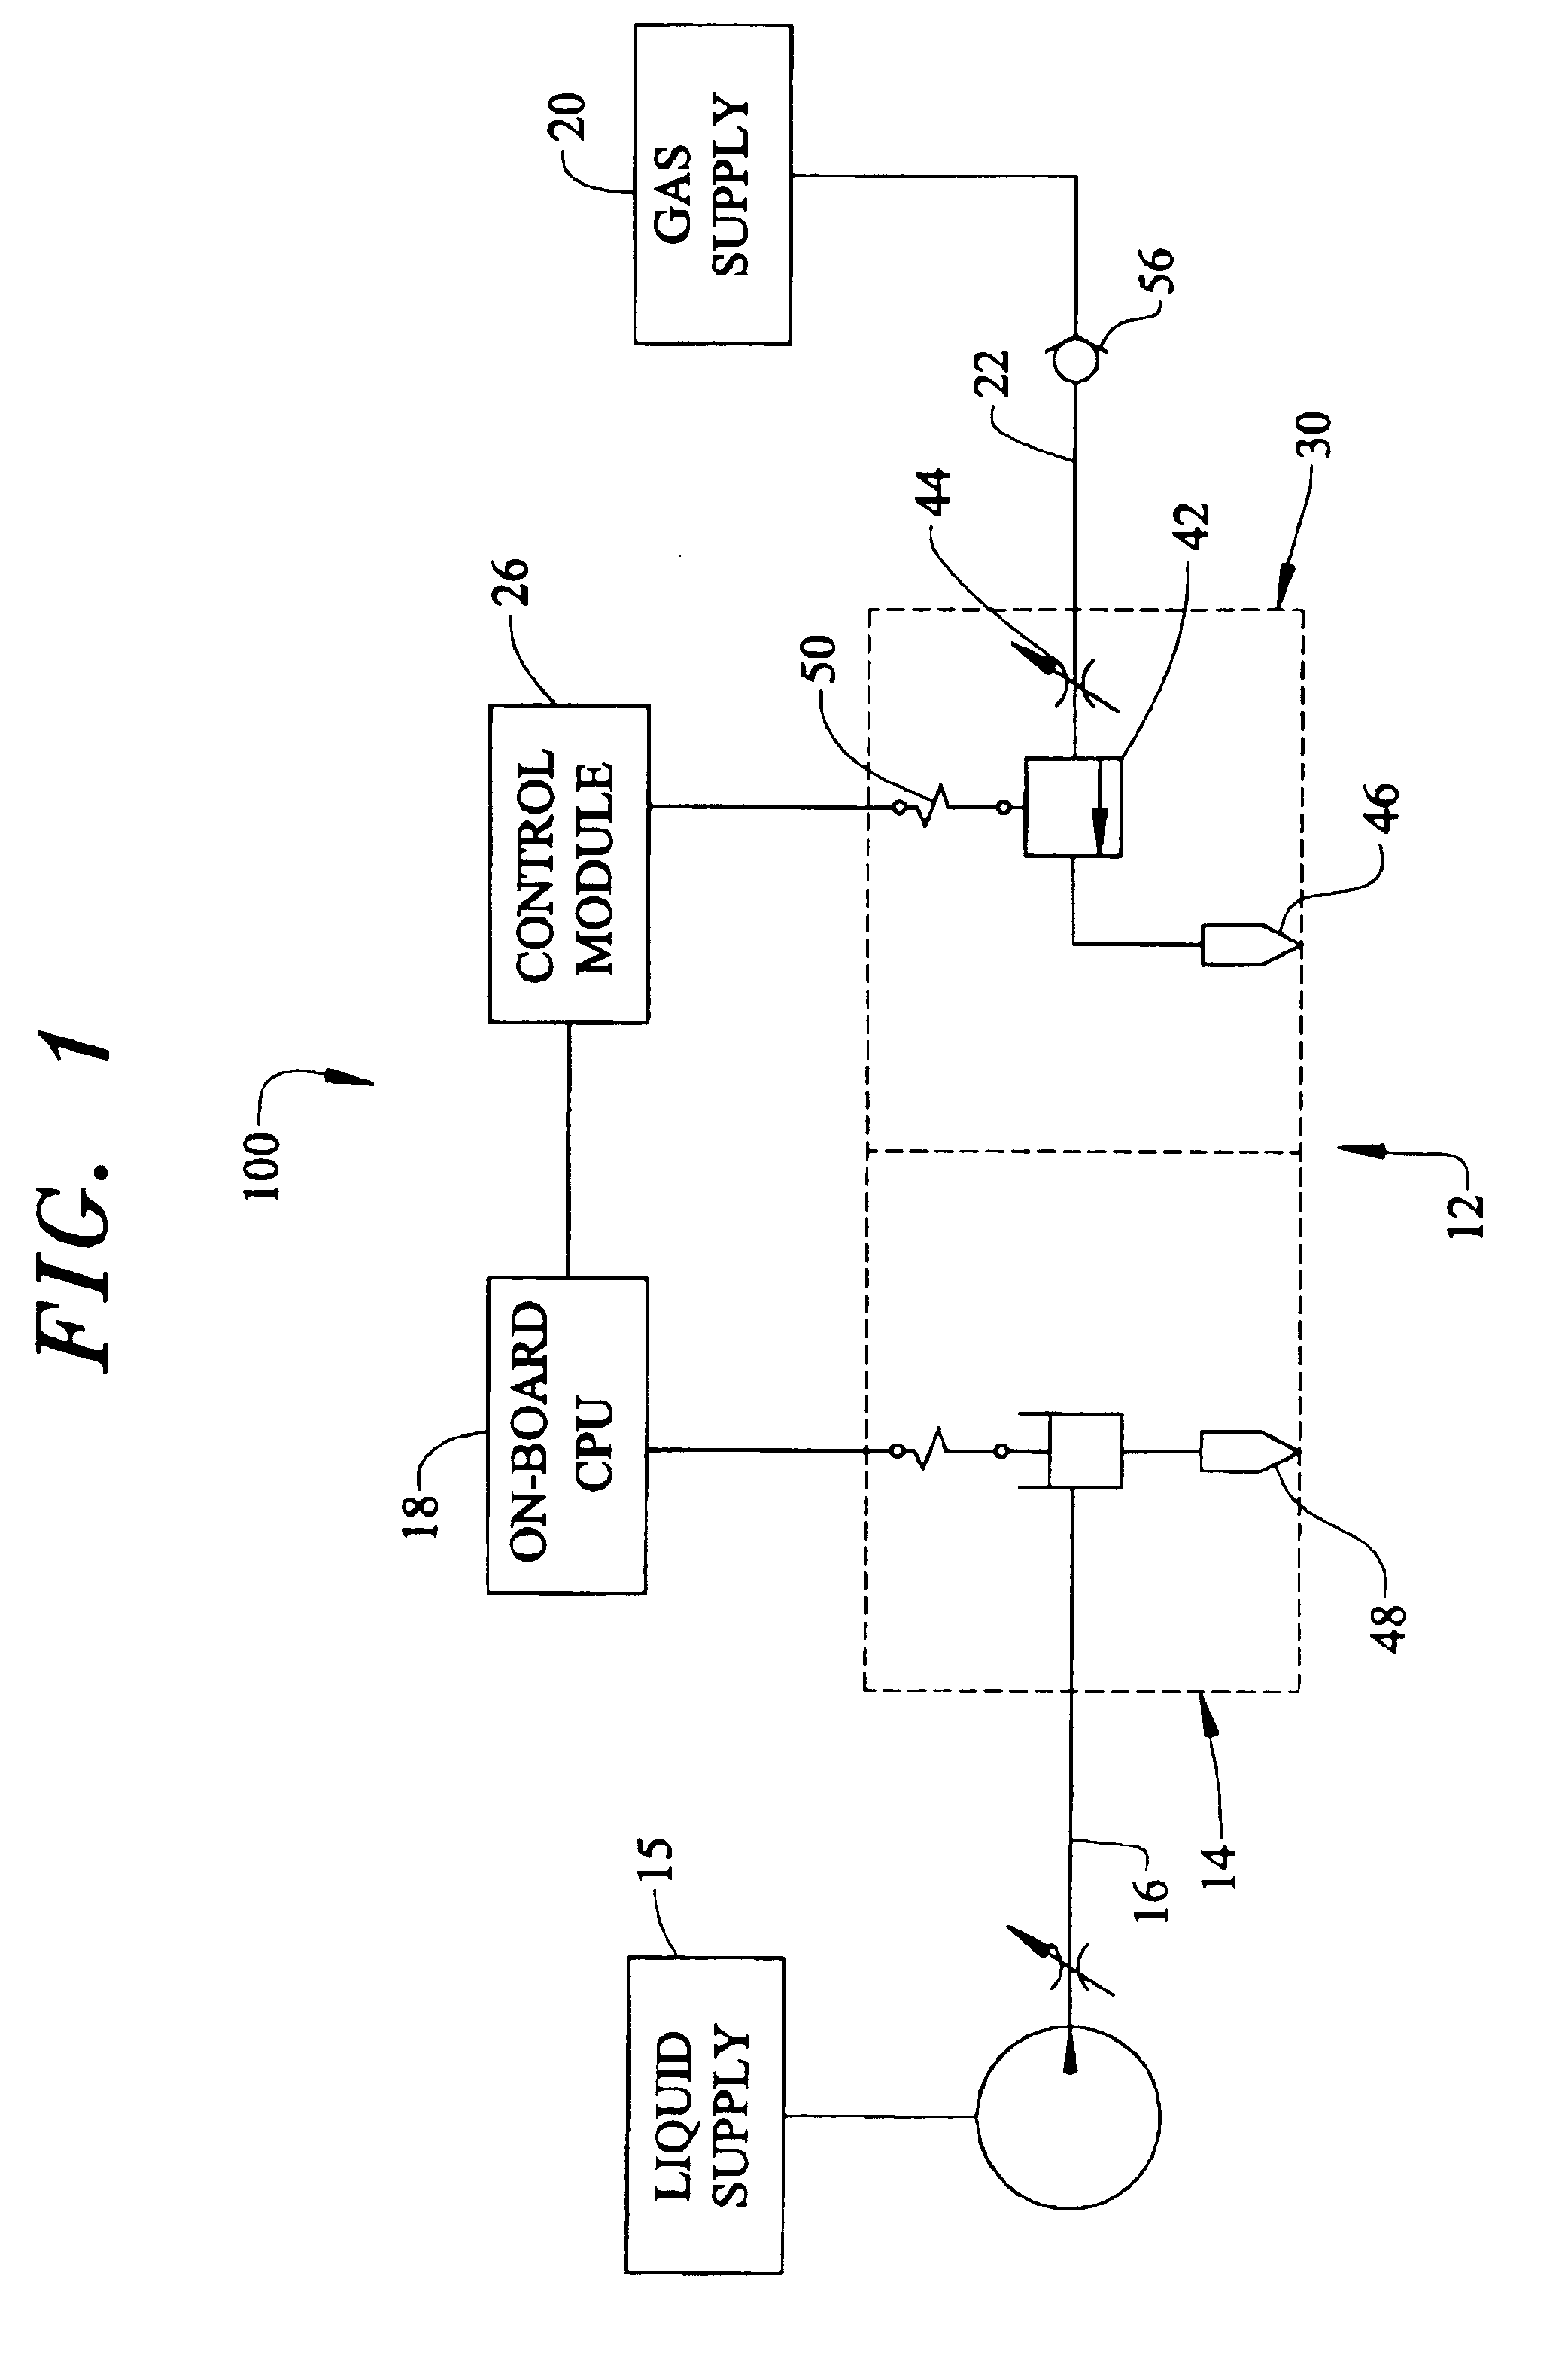 Hydrogen and liquid fuel injection system